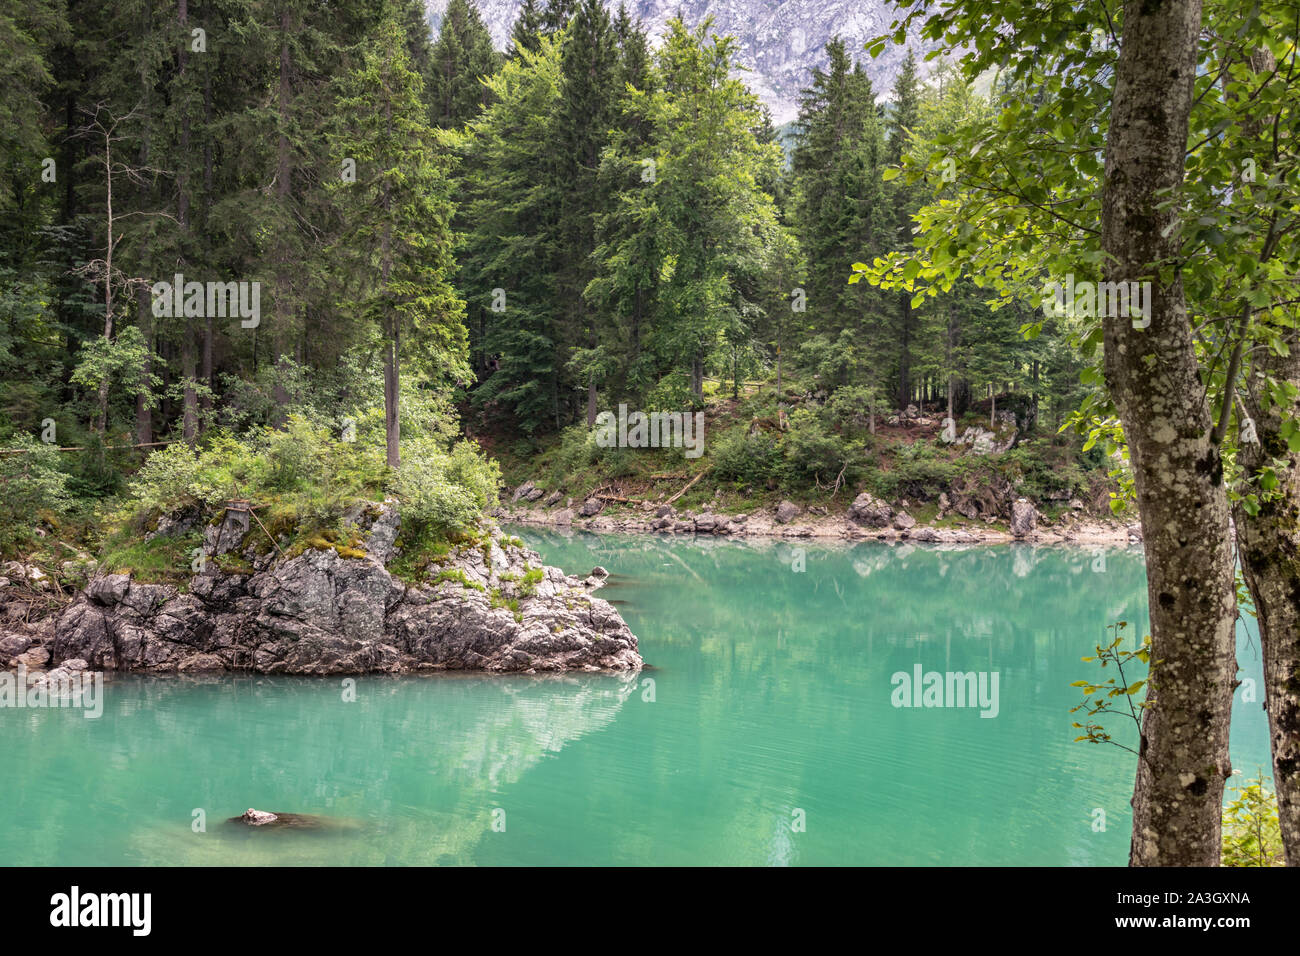 Clear turquoise colored water of Fusine Lake in Italian Alps. The lakes are in an area that is part of the Julian Alps, close to border with Slovenia. Stock Photo